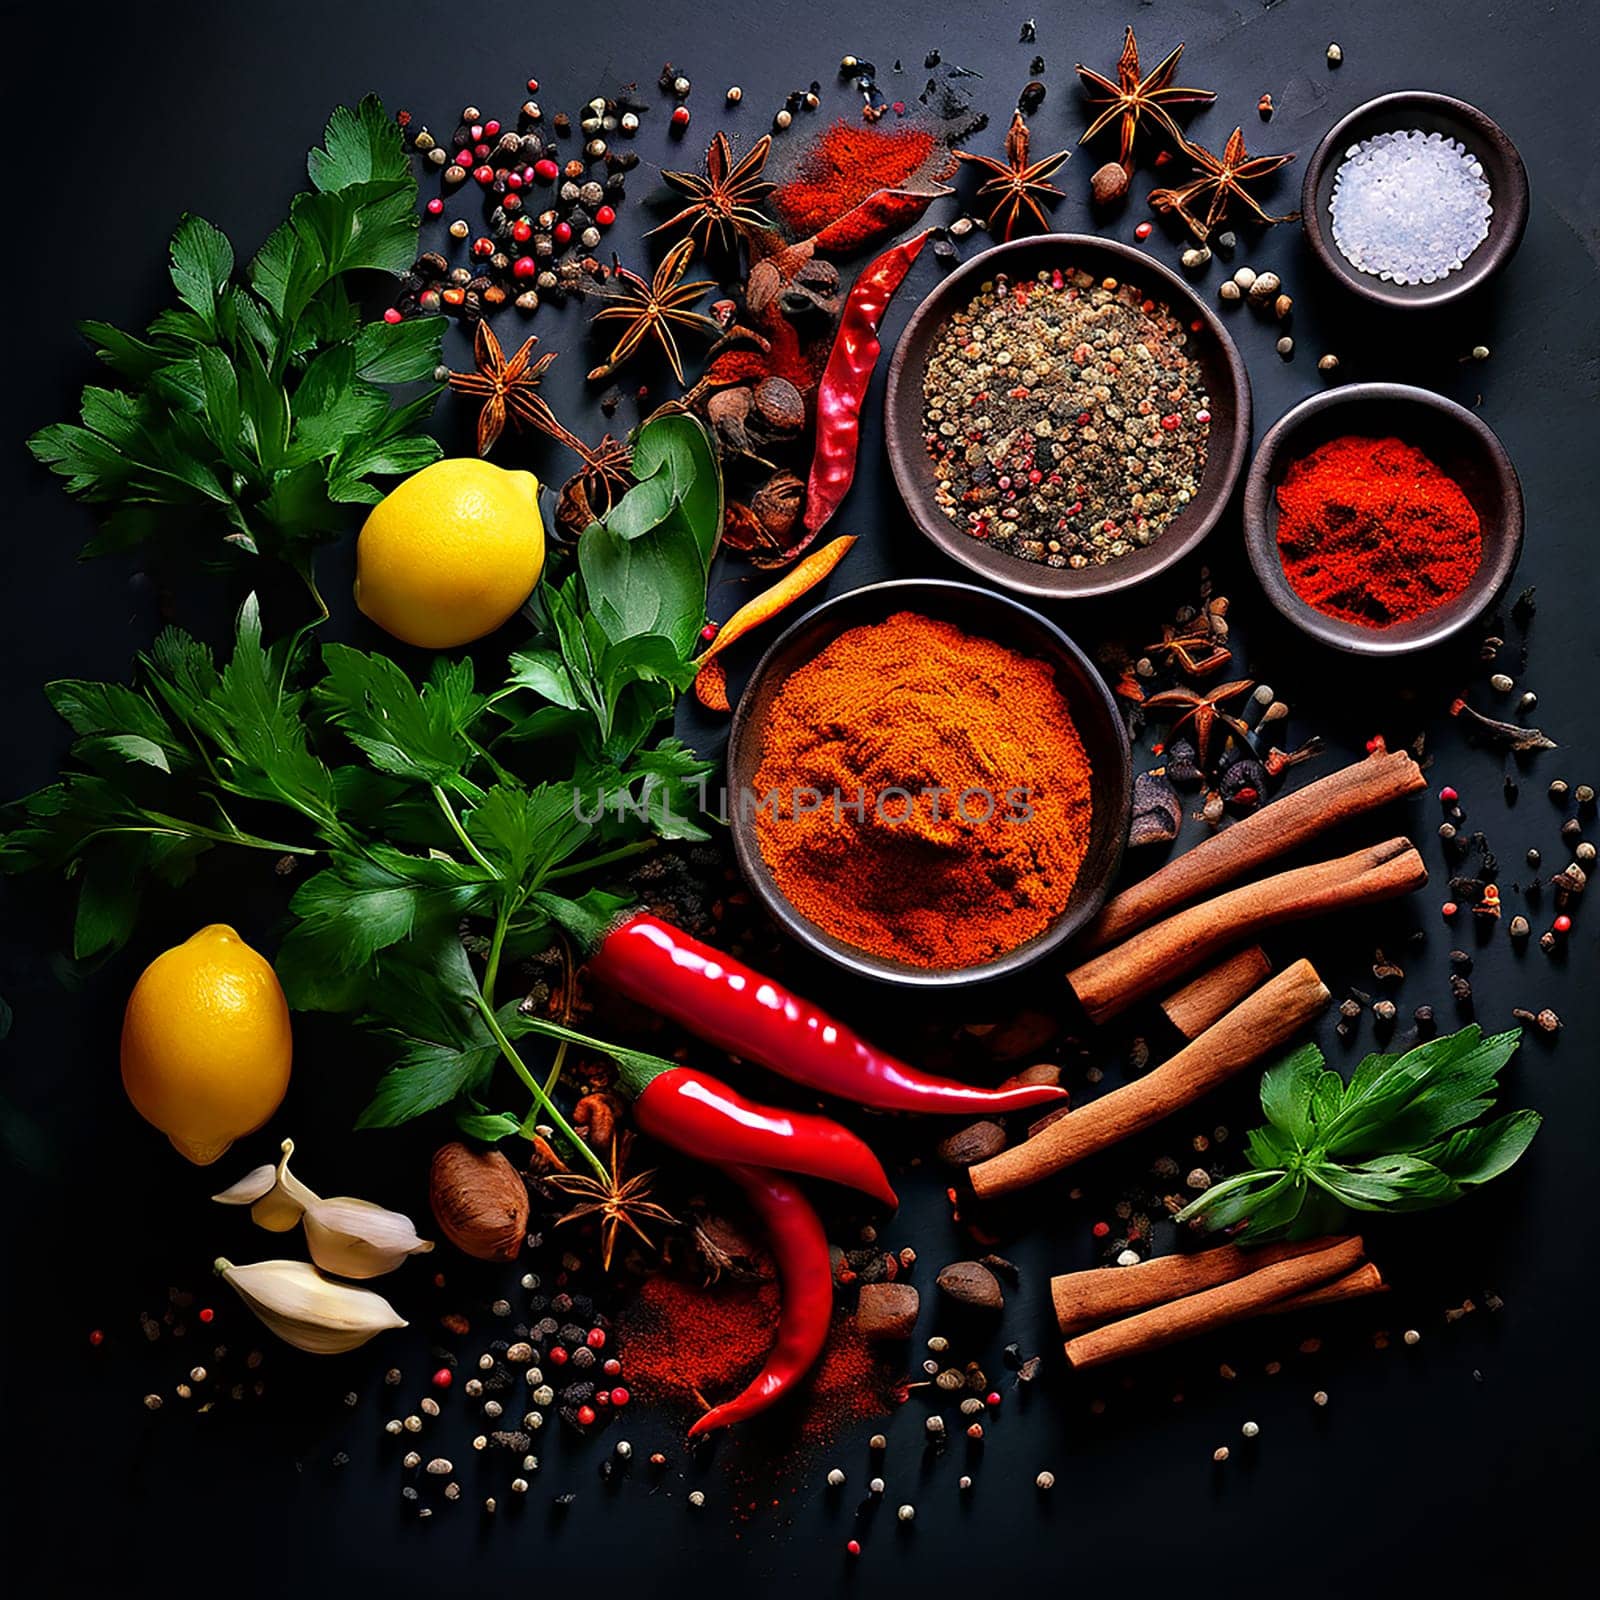 Palette of Taste: Various Herbs and Spices on Dark Background by Petrichor